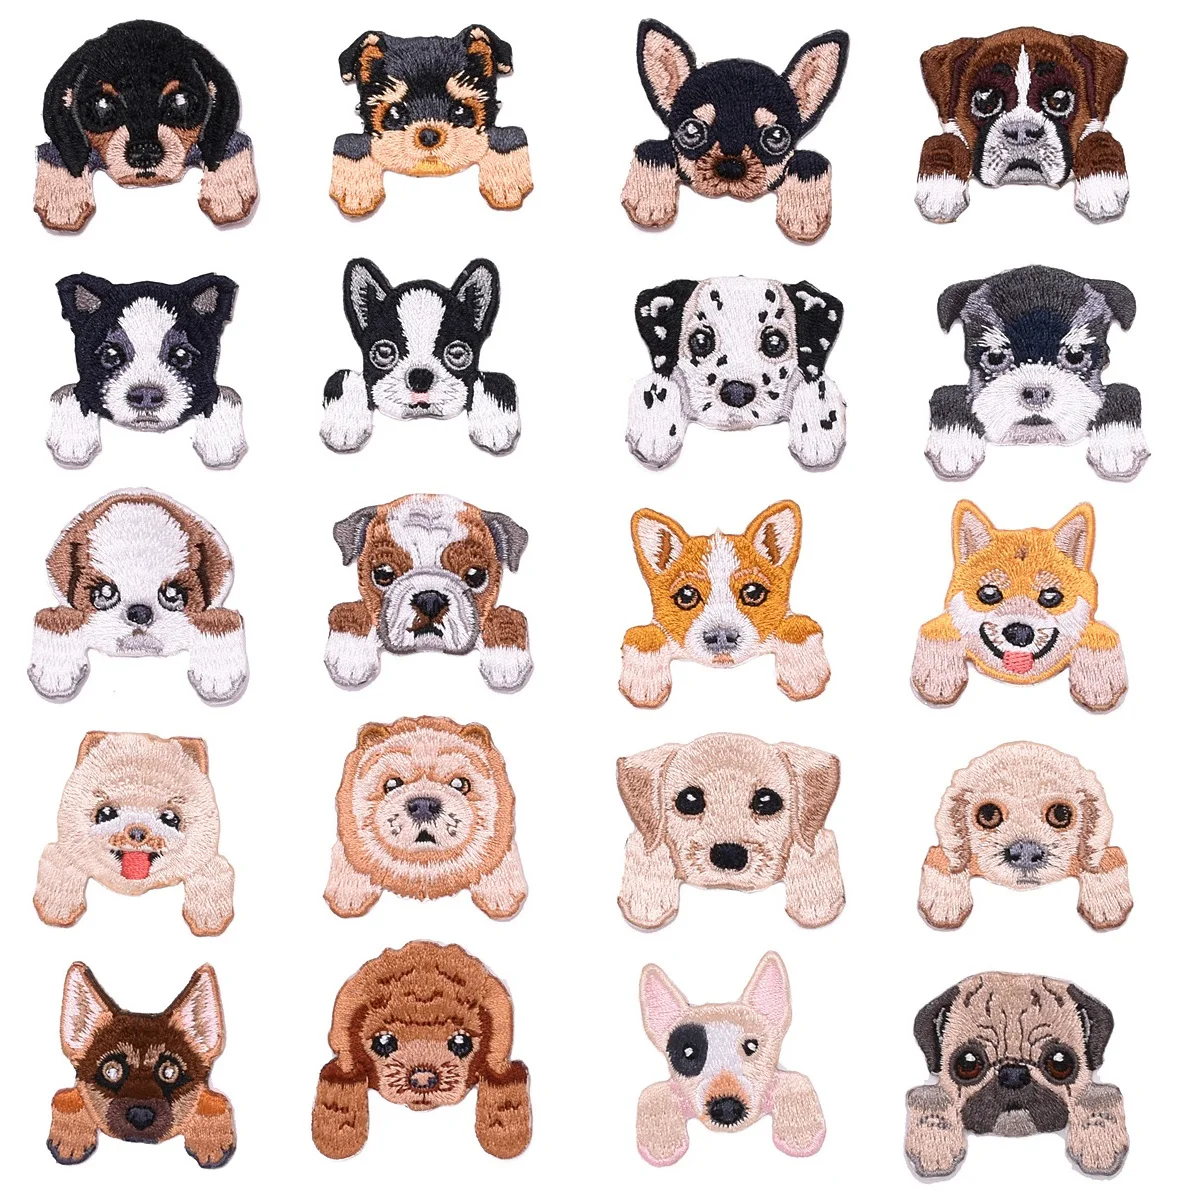 

20Pcs Cute Dog Iron On Embroidered Patches Clothing Appliques, Assorted Mini dog Sew On for Jeans Bags Jackets patch Decorative